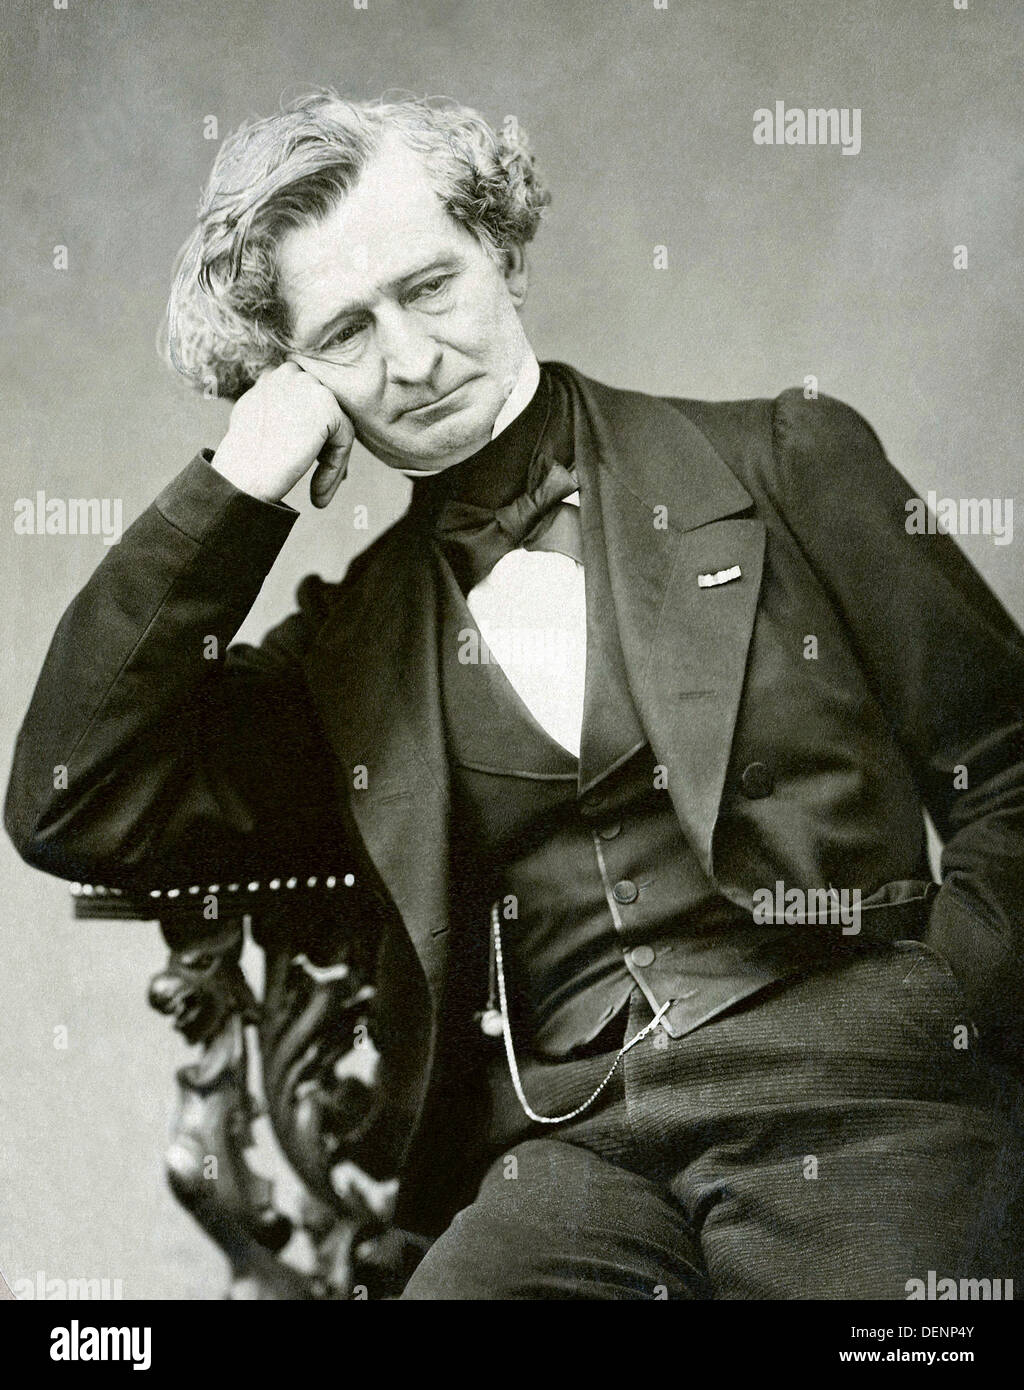 Hector Berlioz, French composer Stock Photo